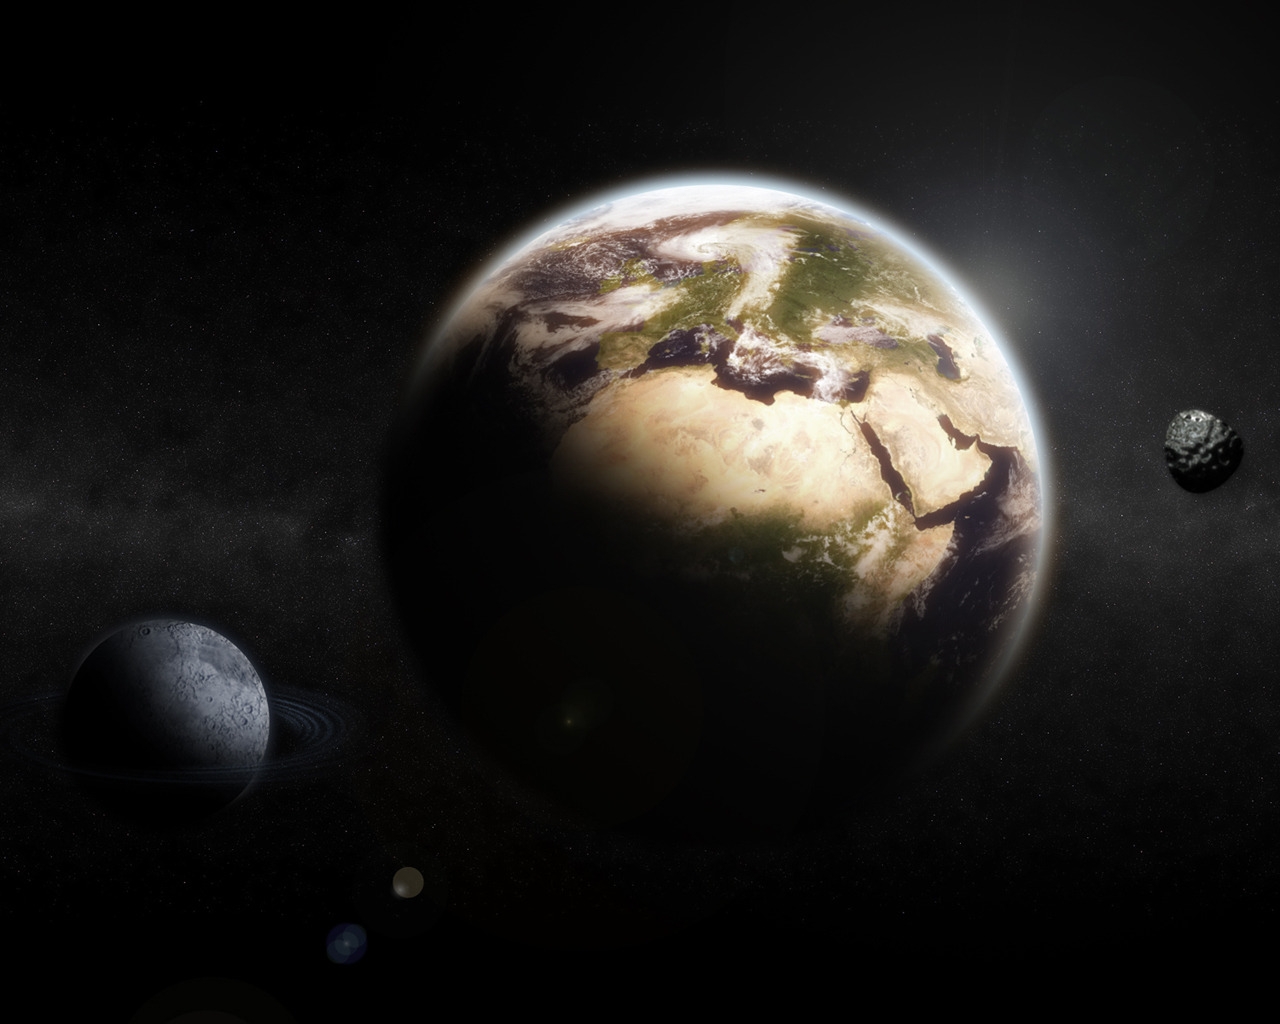 Earth & Moon for 1280 x 1024 resolution